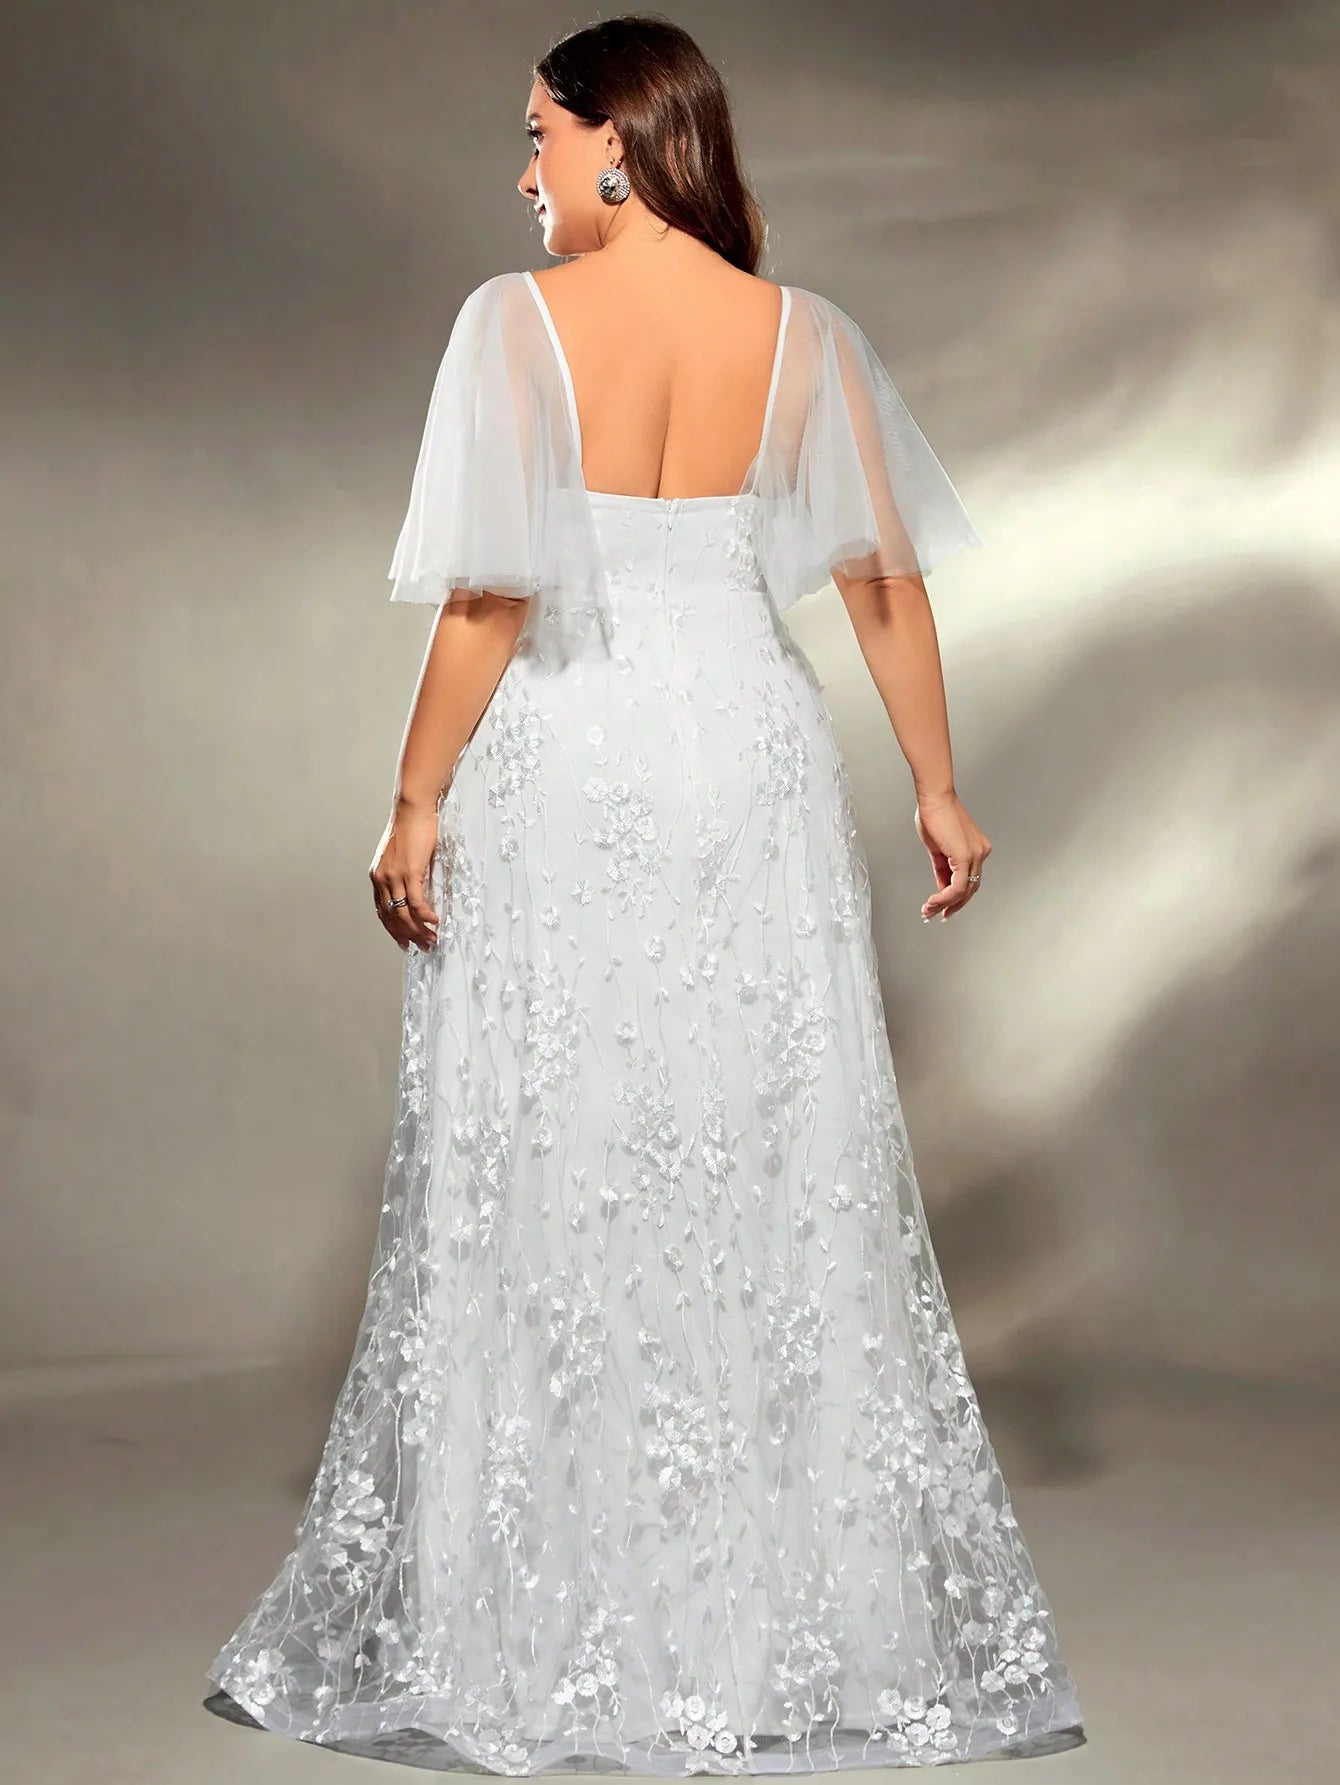 Mgiacy plus size V-neck gauze large trumpet sleeve patchwork embroidered lace A set wedding gown PROM dress Party dress